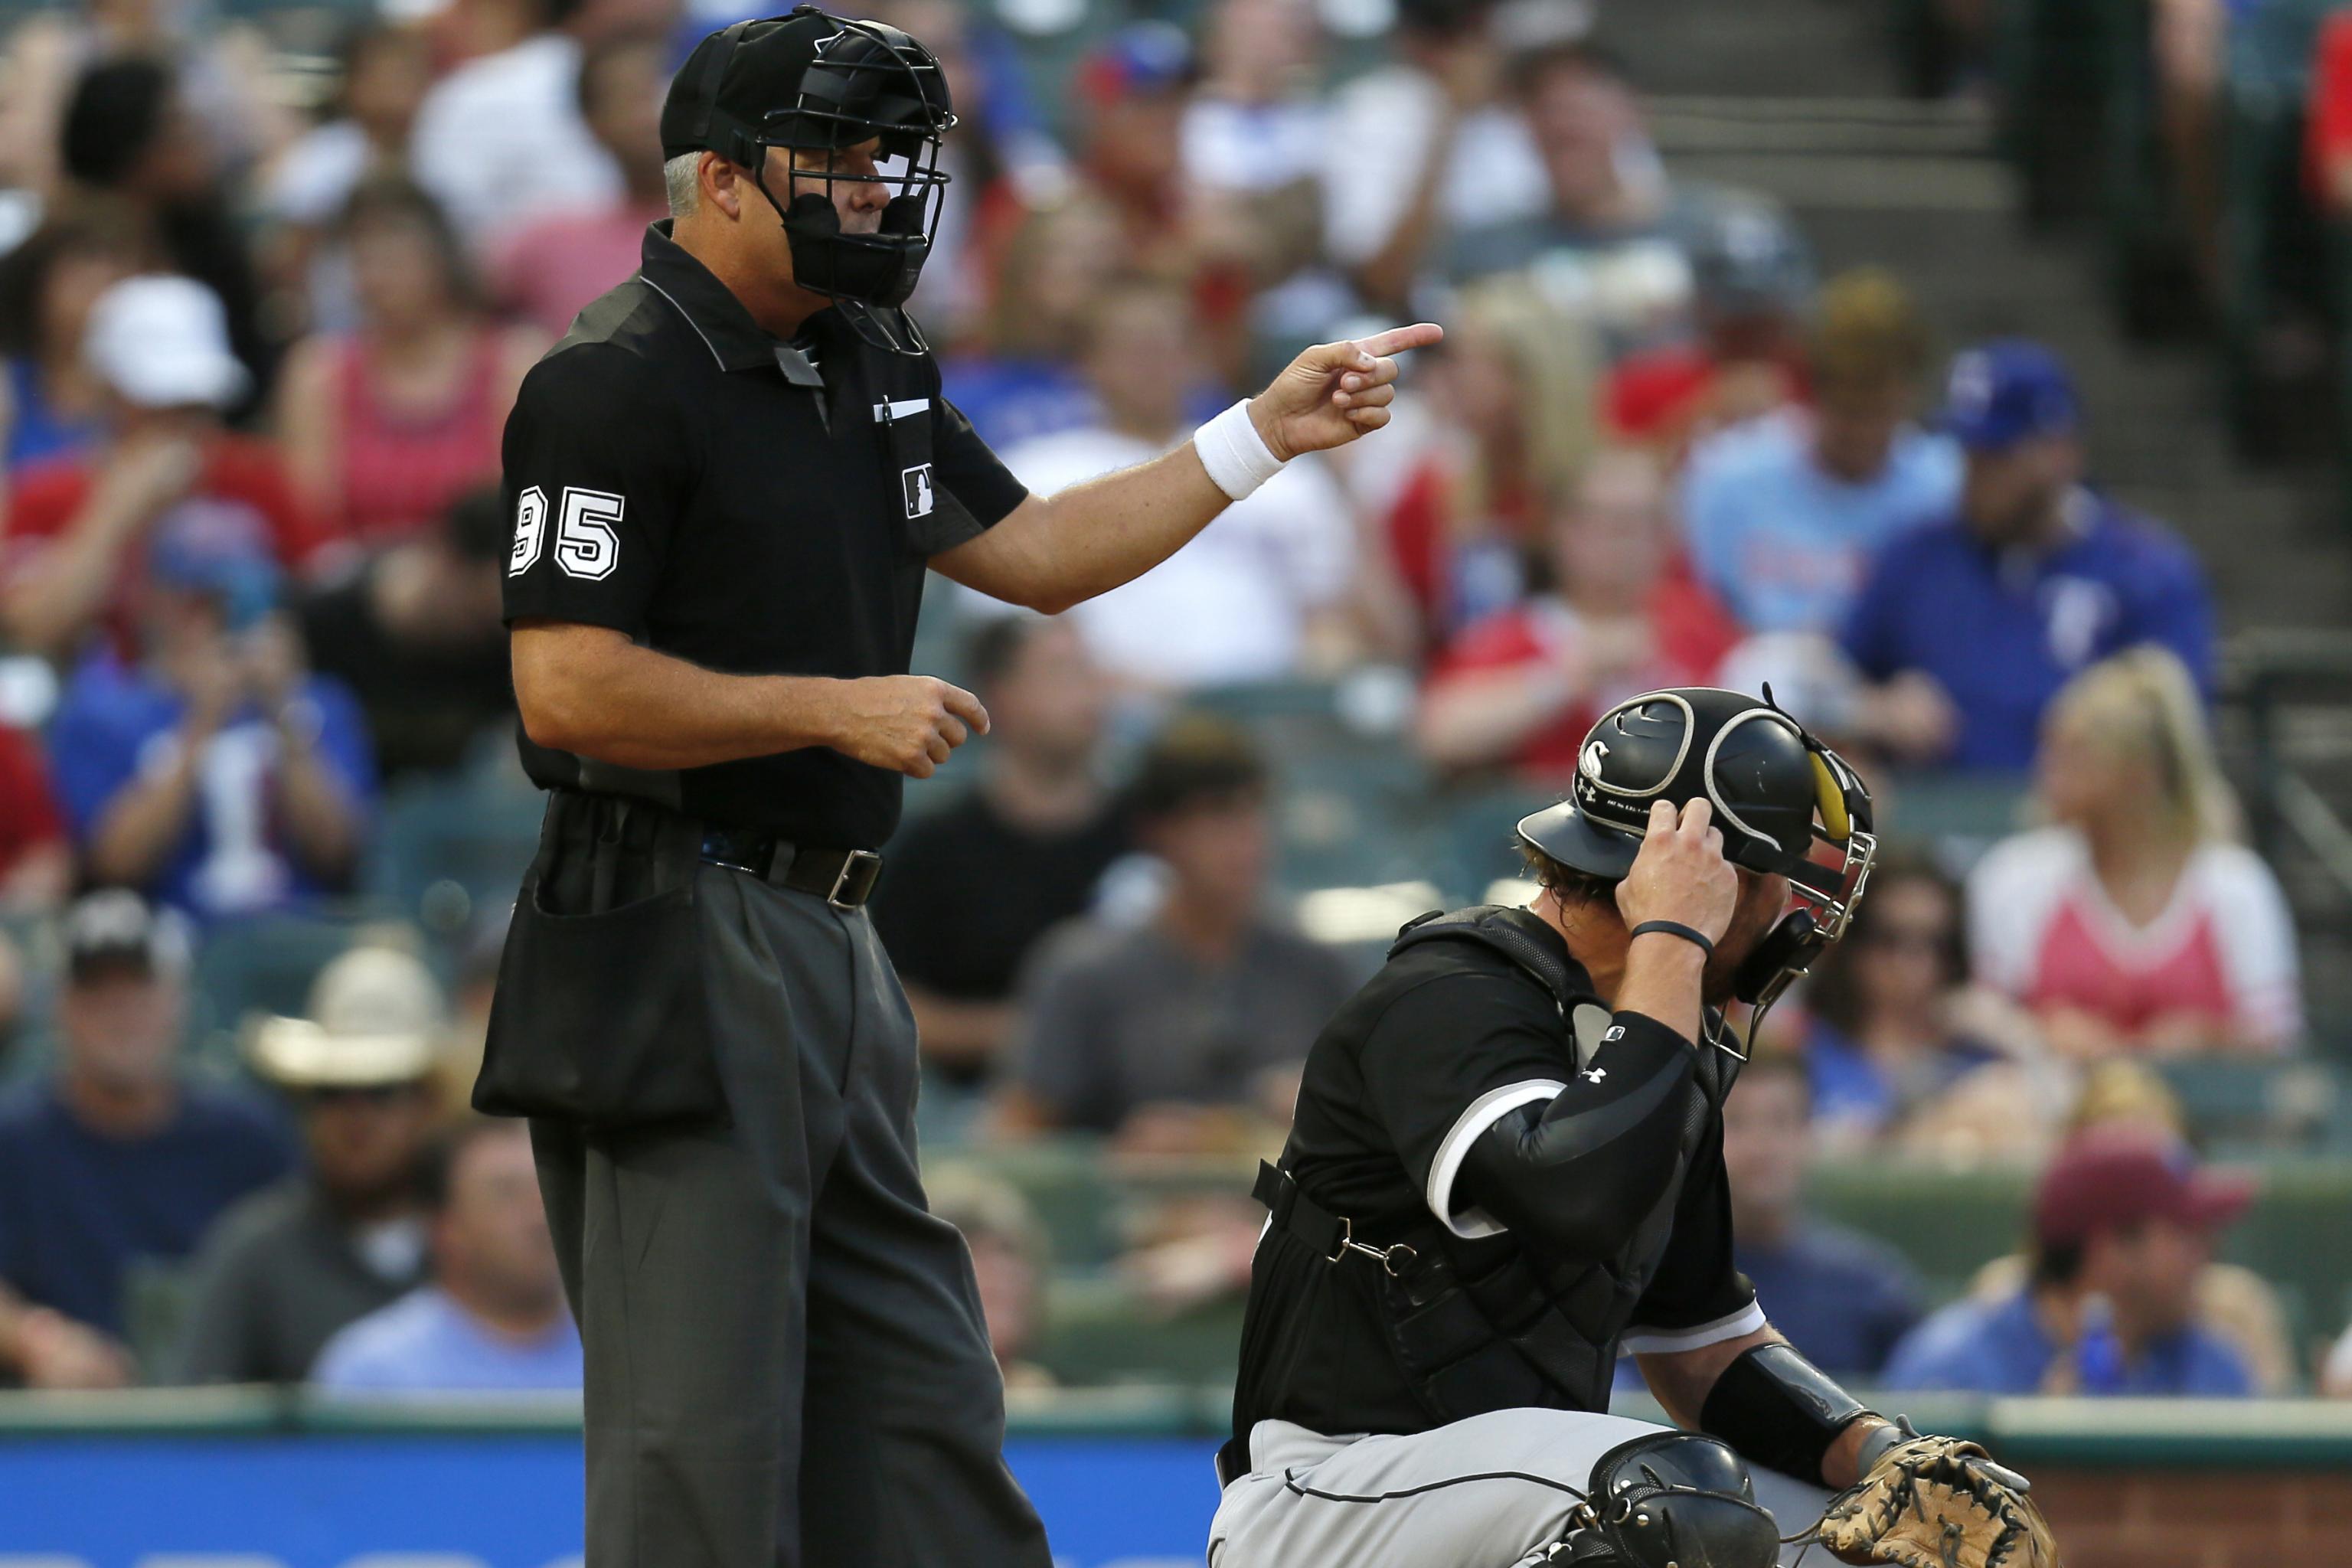 MLB umpires wear wristbands to protest 'abusive' treatment